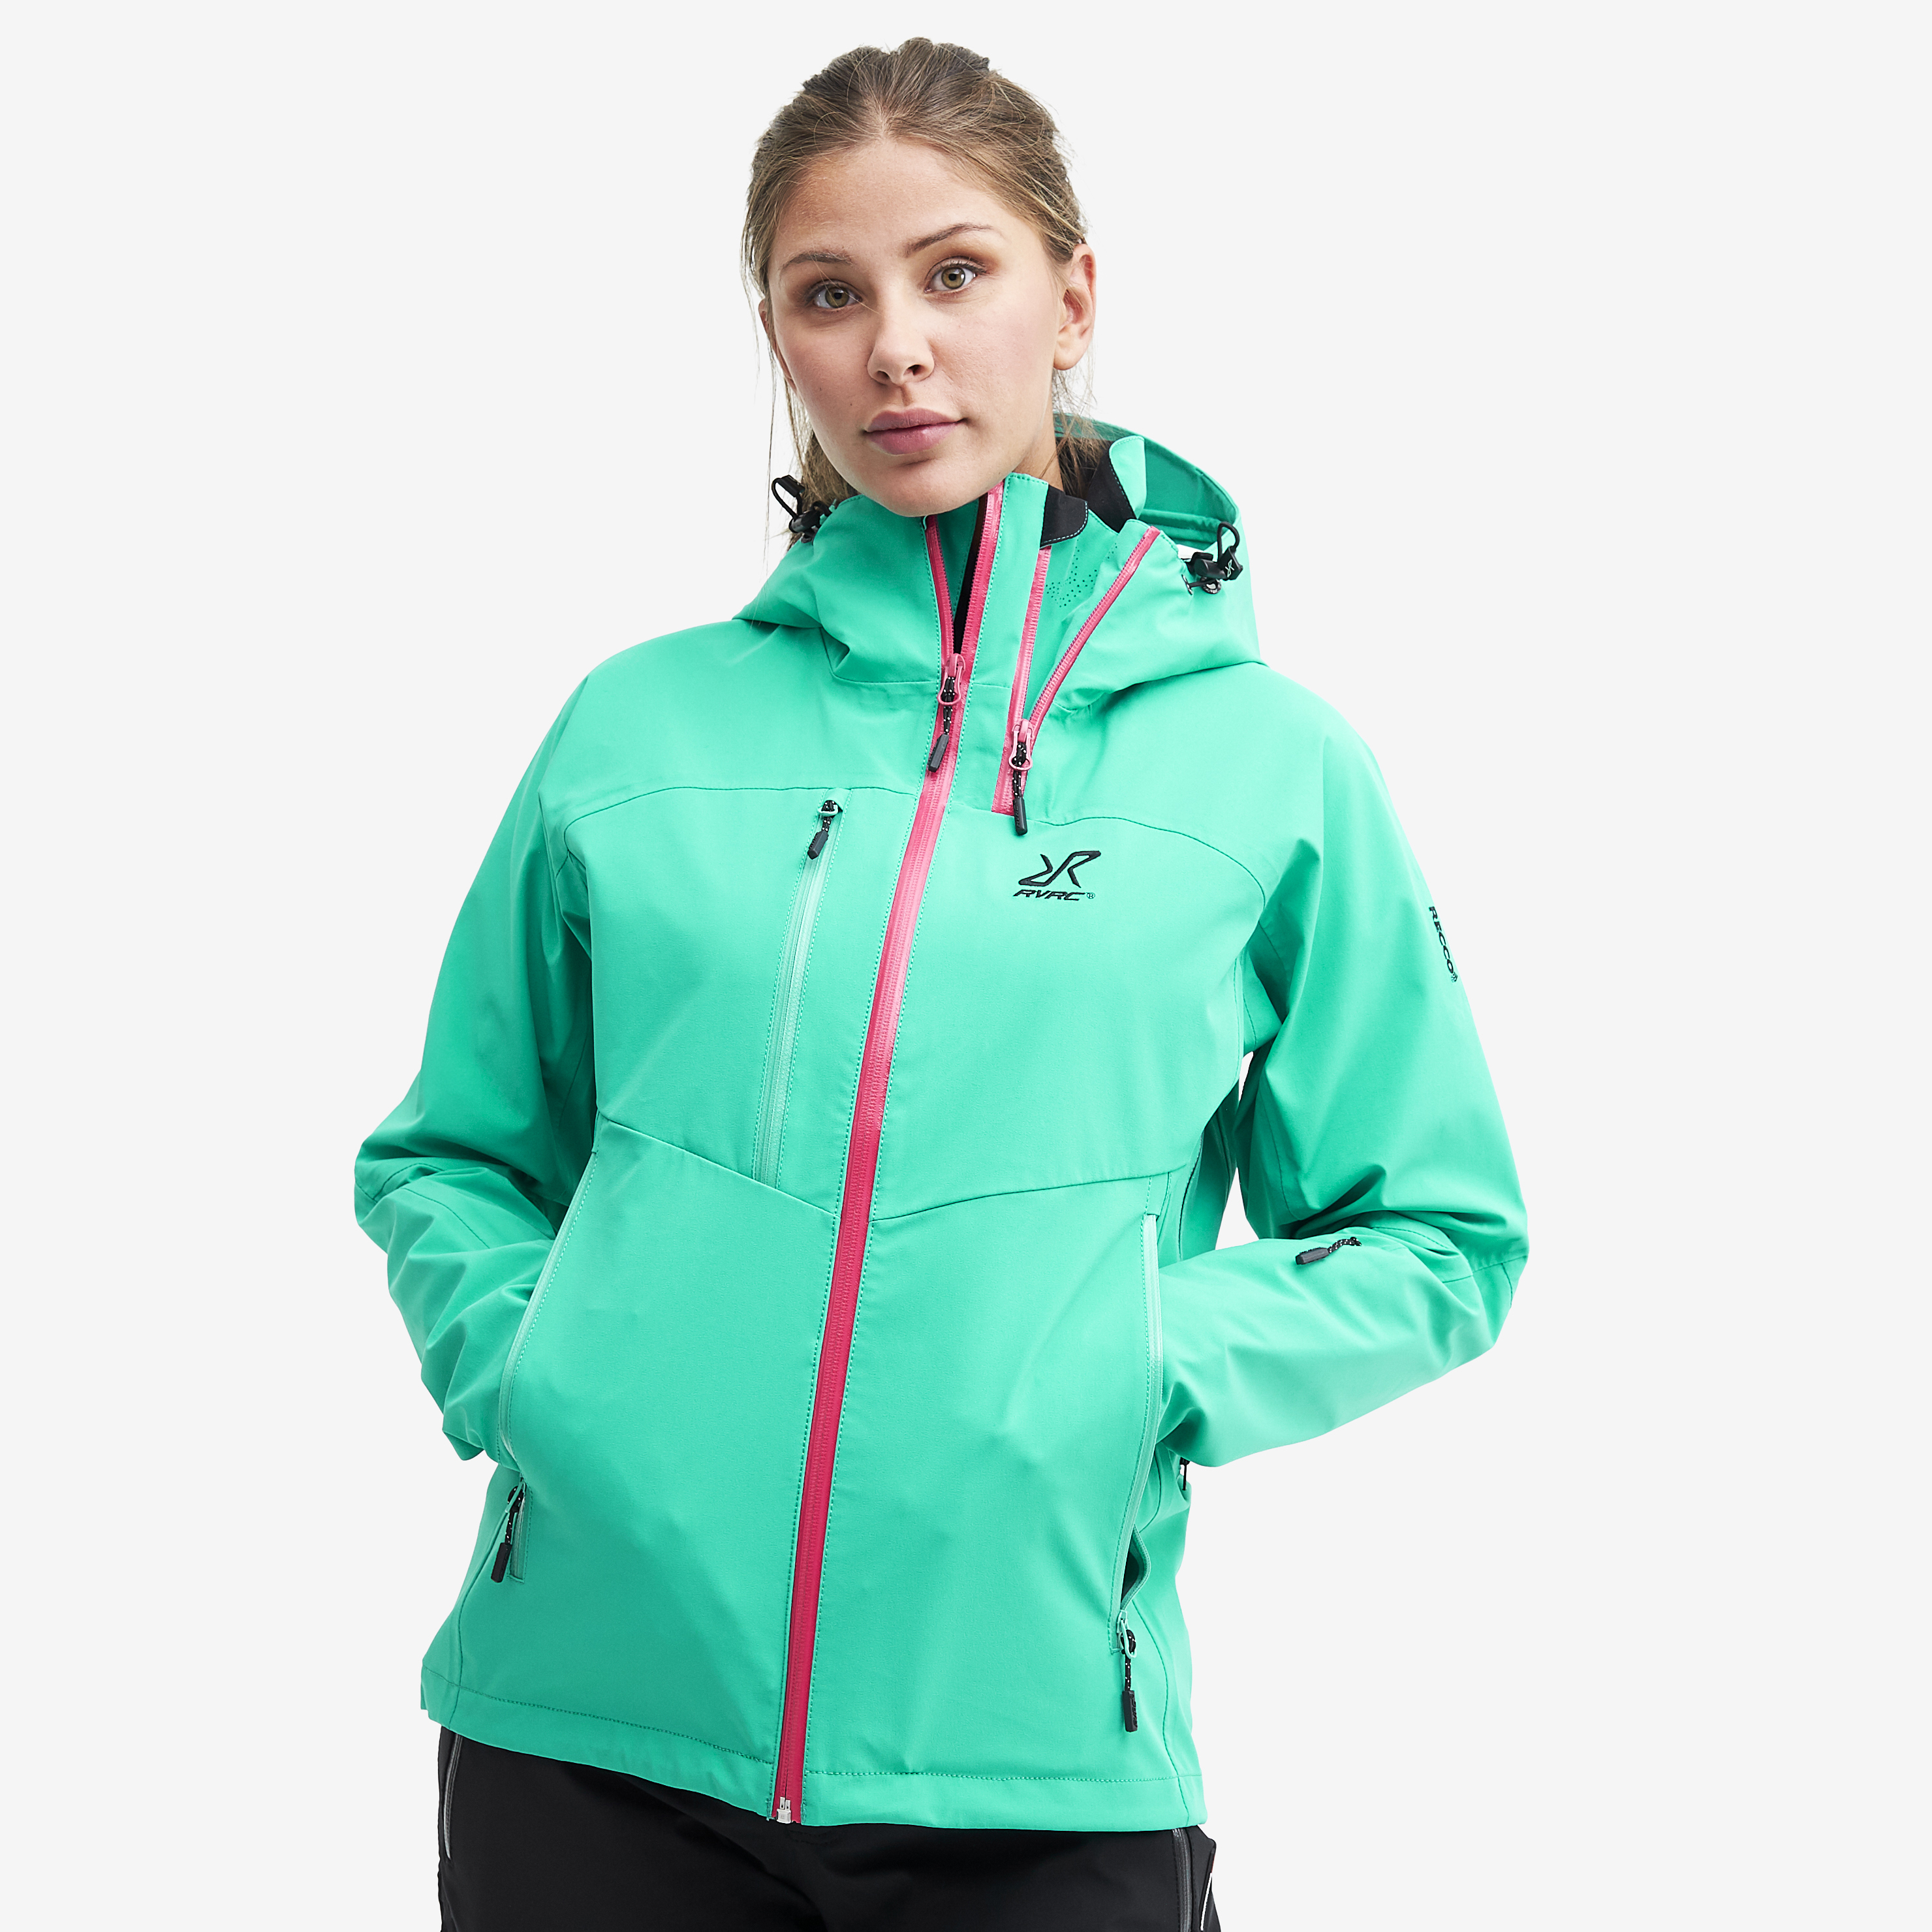 Cyclone Rescue Jacket 2.0 Spectra Green Naiset